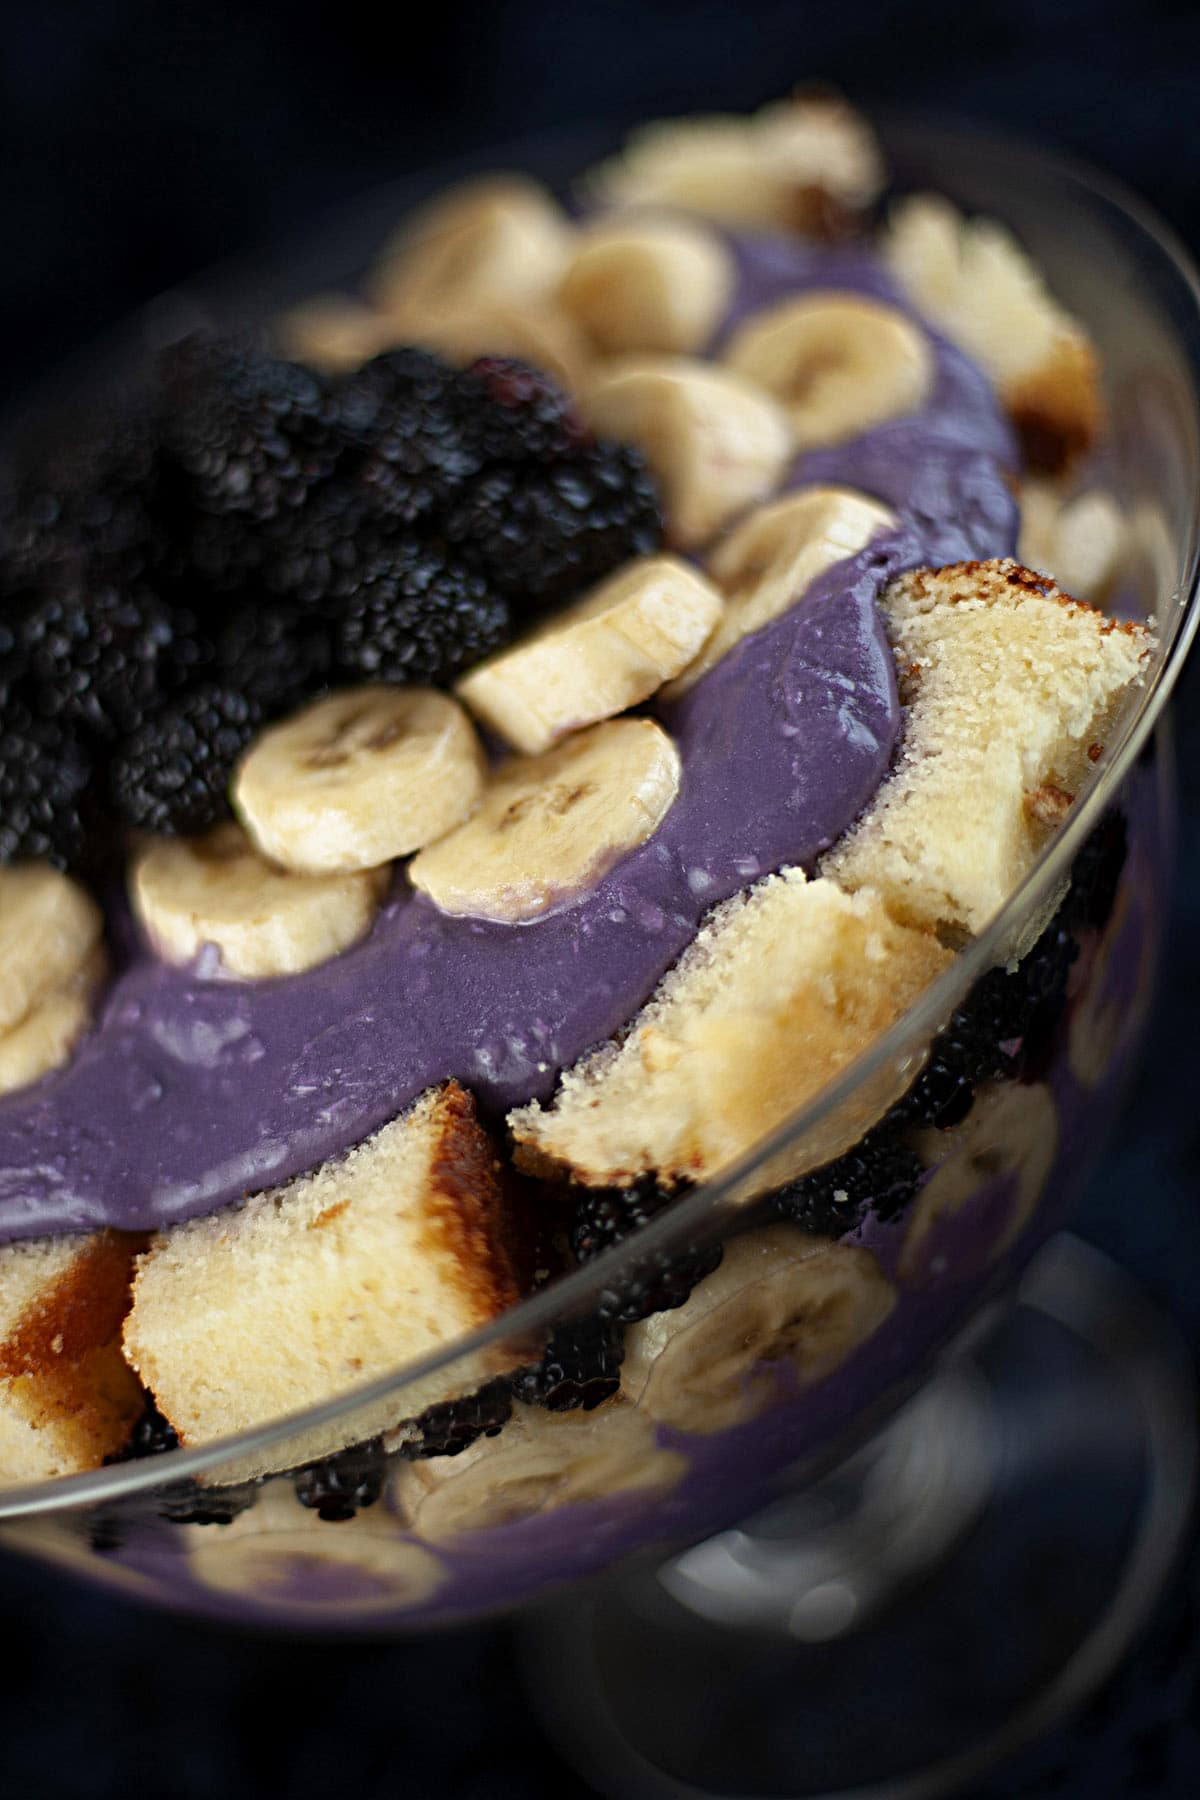 A close up view of a rum runner trifle, in a large glass bowl. Layers of cake cubes, purple pudding, bananas, and blackberries are visible.